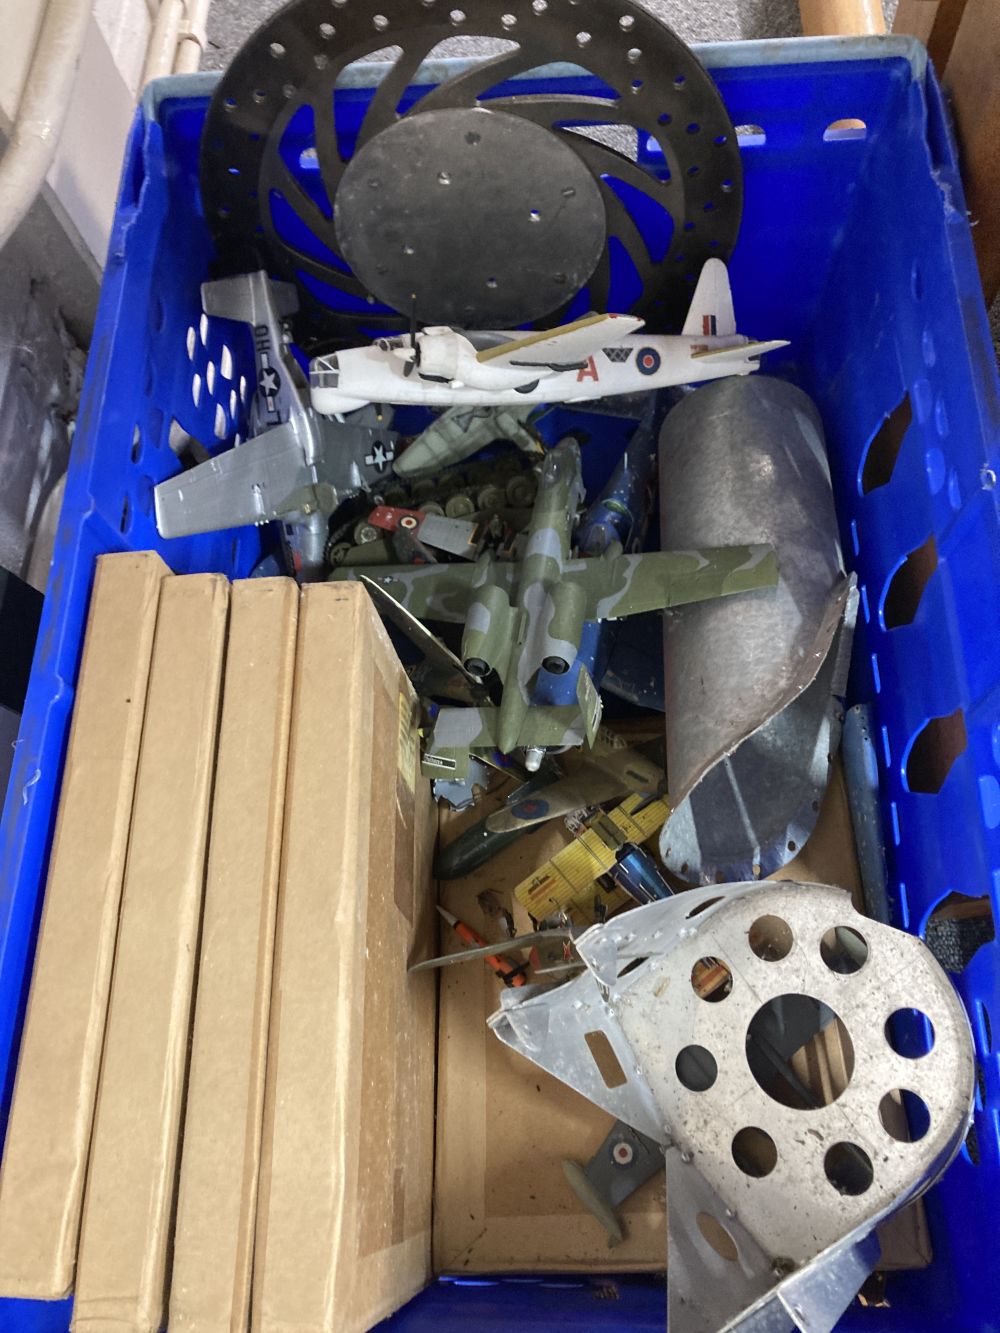 Aircraft Spares. WWII and later aircraft spares (4 boxes) - Image 2 of 6